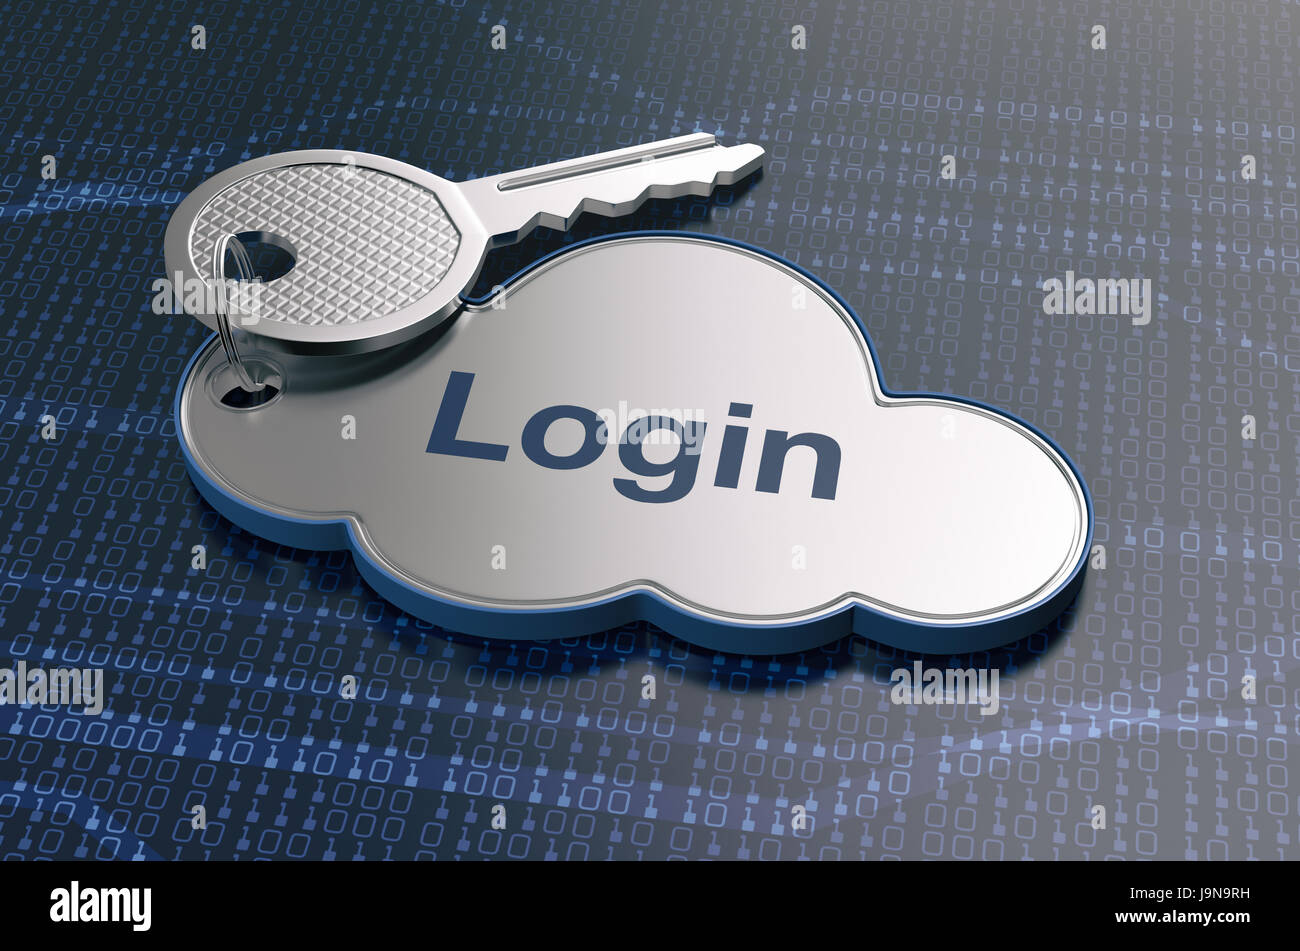 one cloud with a key and text: login, concept of computer, web, network (3d render) Stock Photo